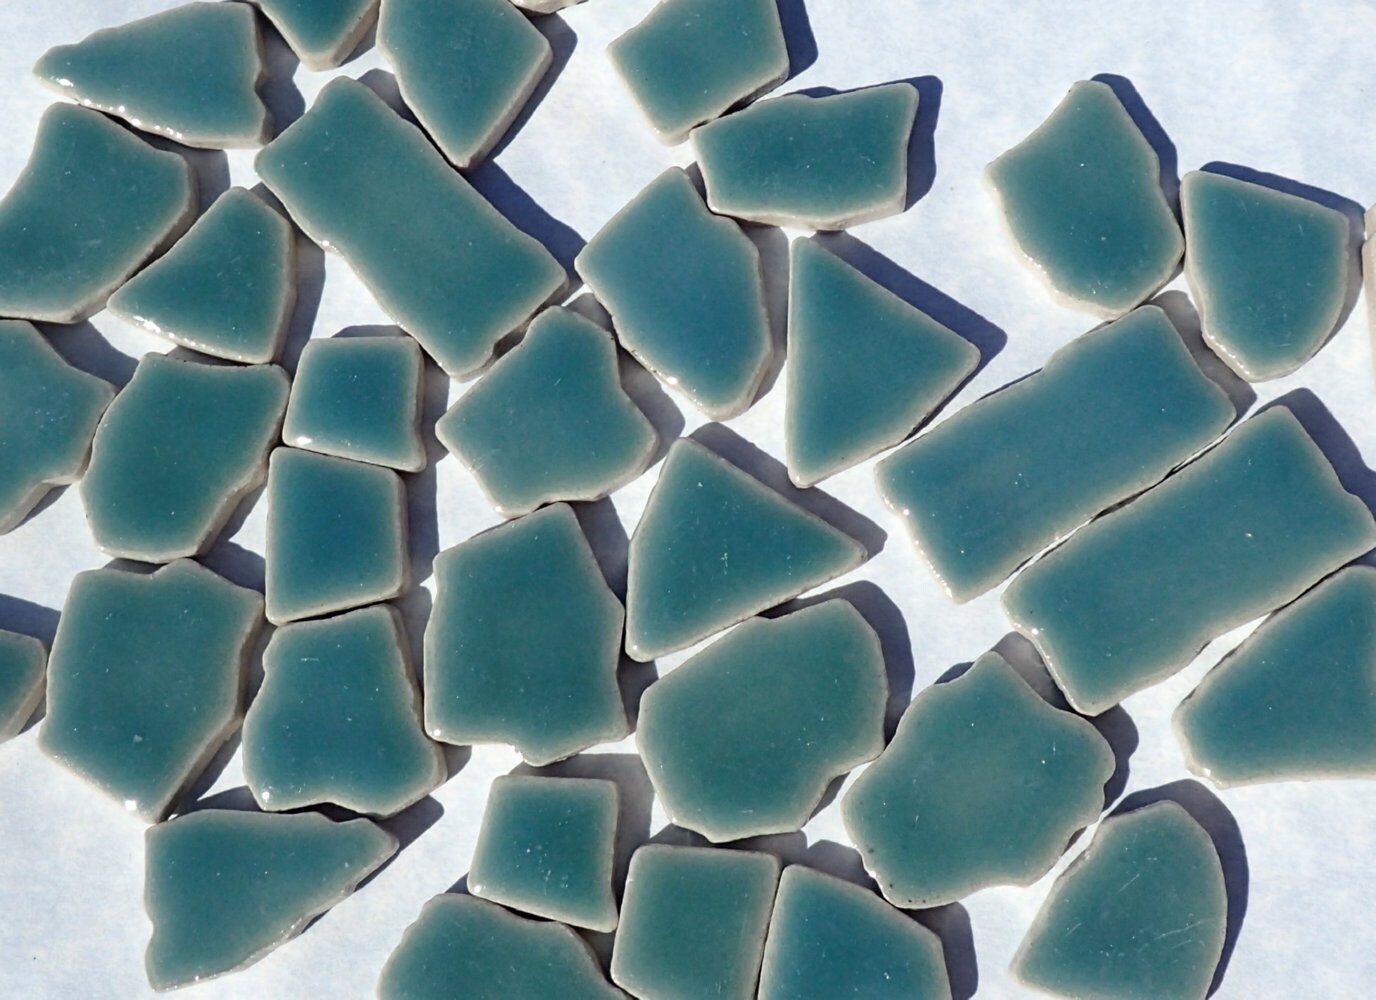 Sea Green Mosaic Ceramic Tiles - Jigsaw Puzzle Shaped Pieces - Half Pound - Assorted Sizes Random Shapes in Phthalo Green